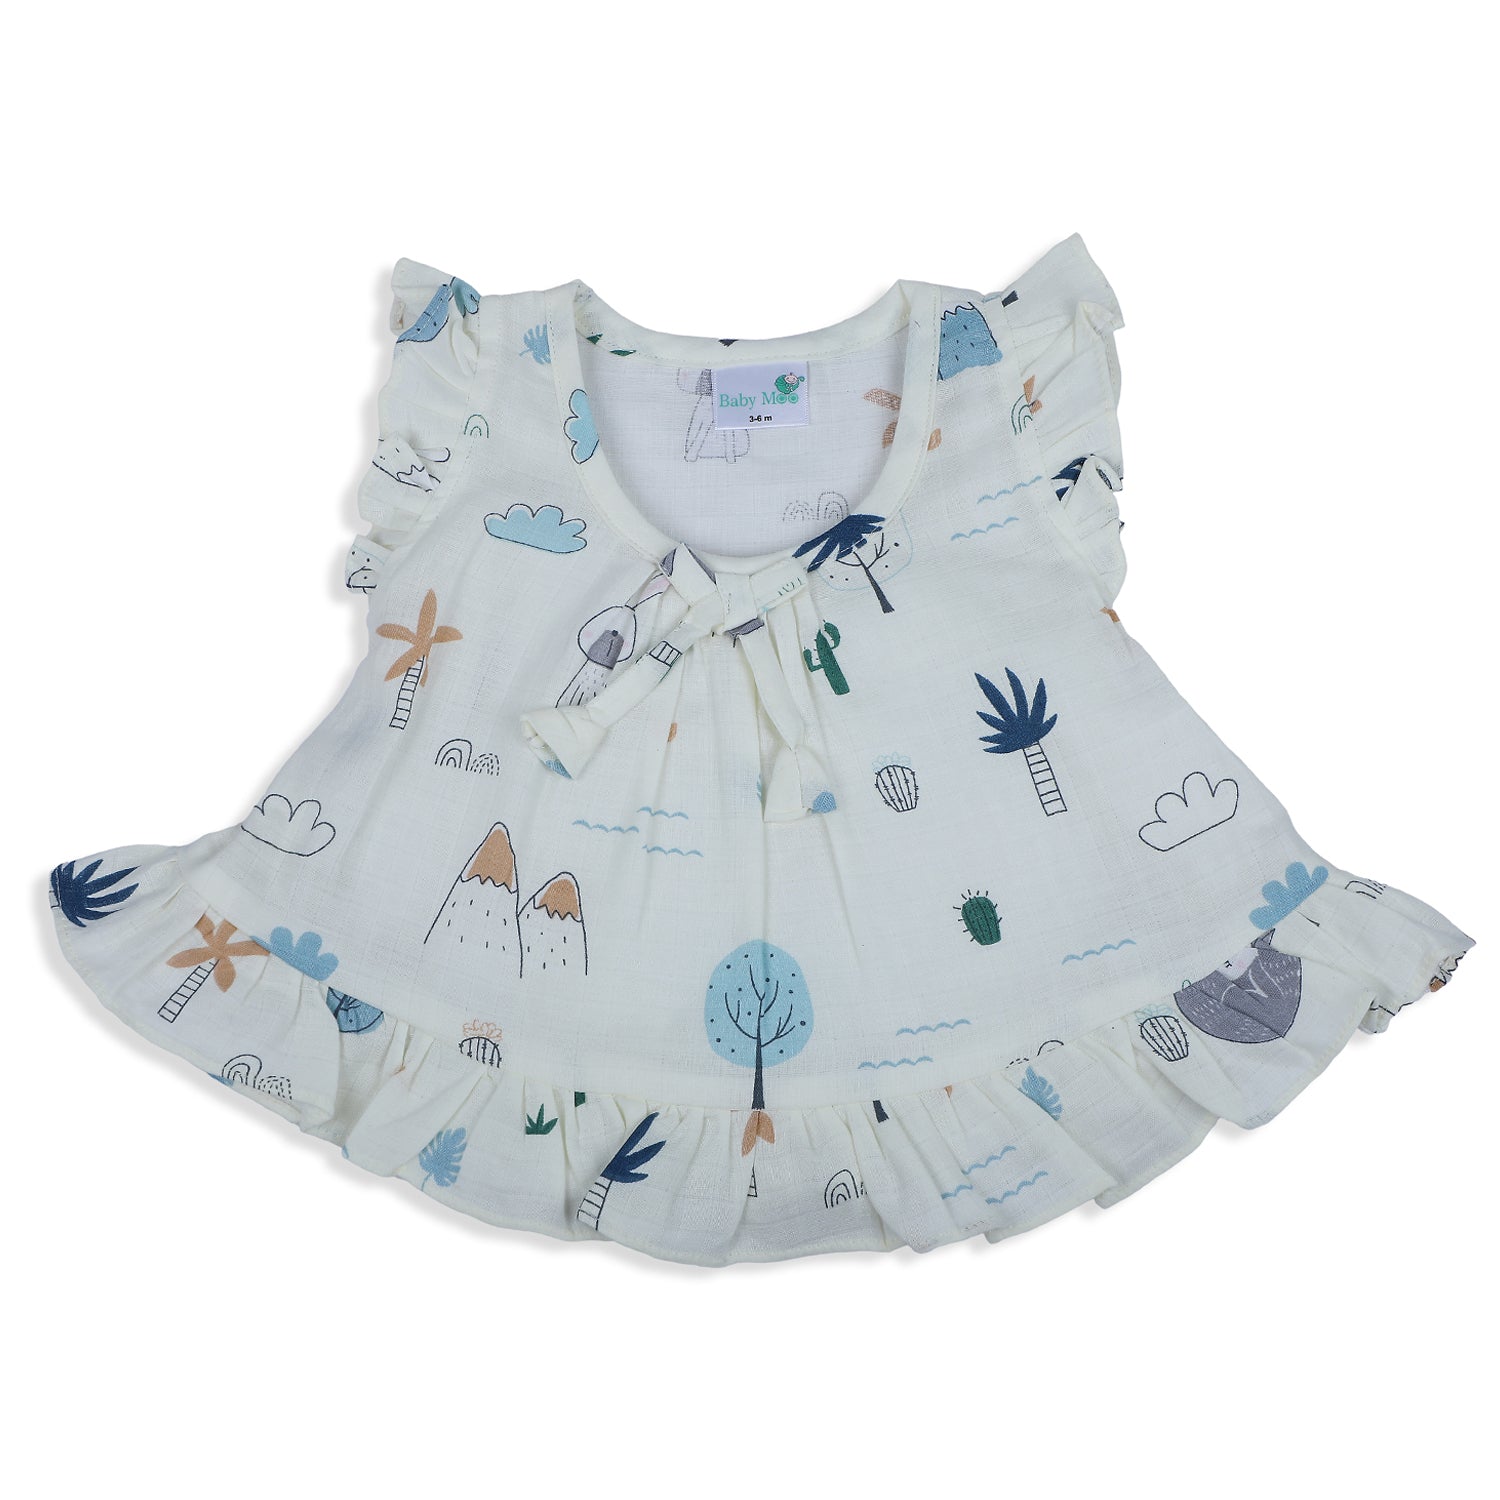 Baby Moo Sunny Desert Muslin Frilly Top And Shorts Co-ord Set - Cream - Baby Moo